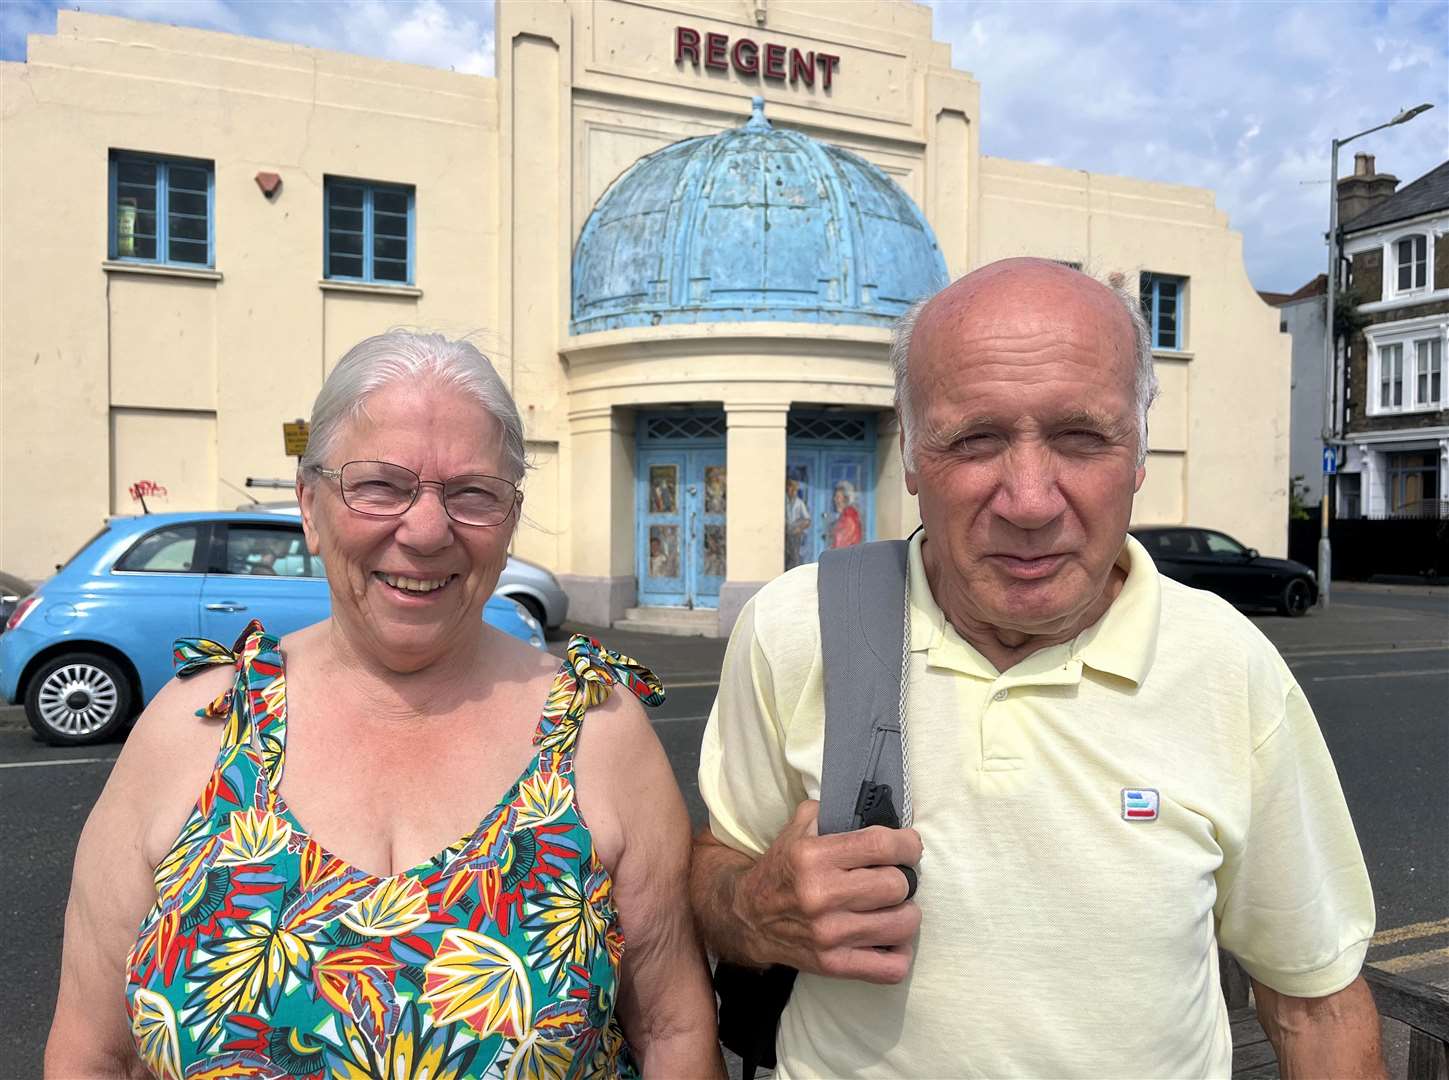 Sheila and Ray Chapman come to Deal every summer for a holiday and say the Regent is an eyesore